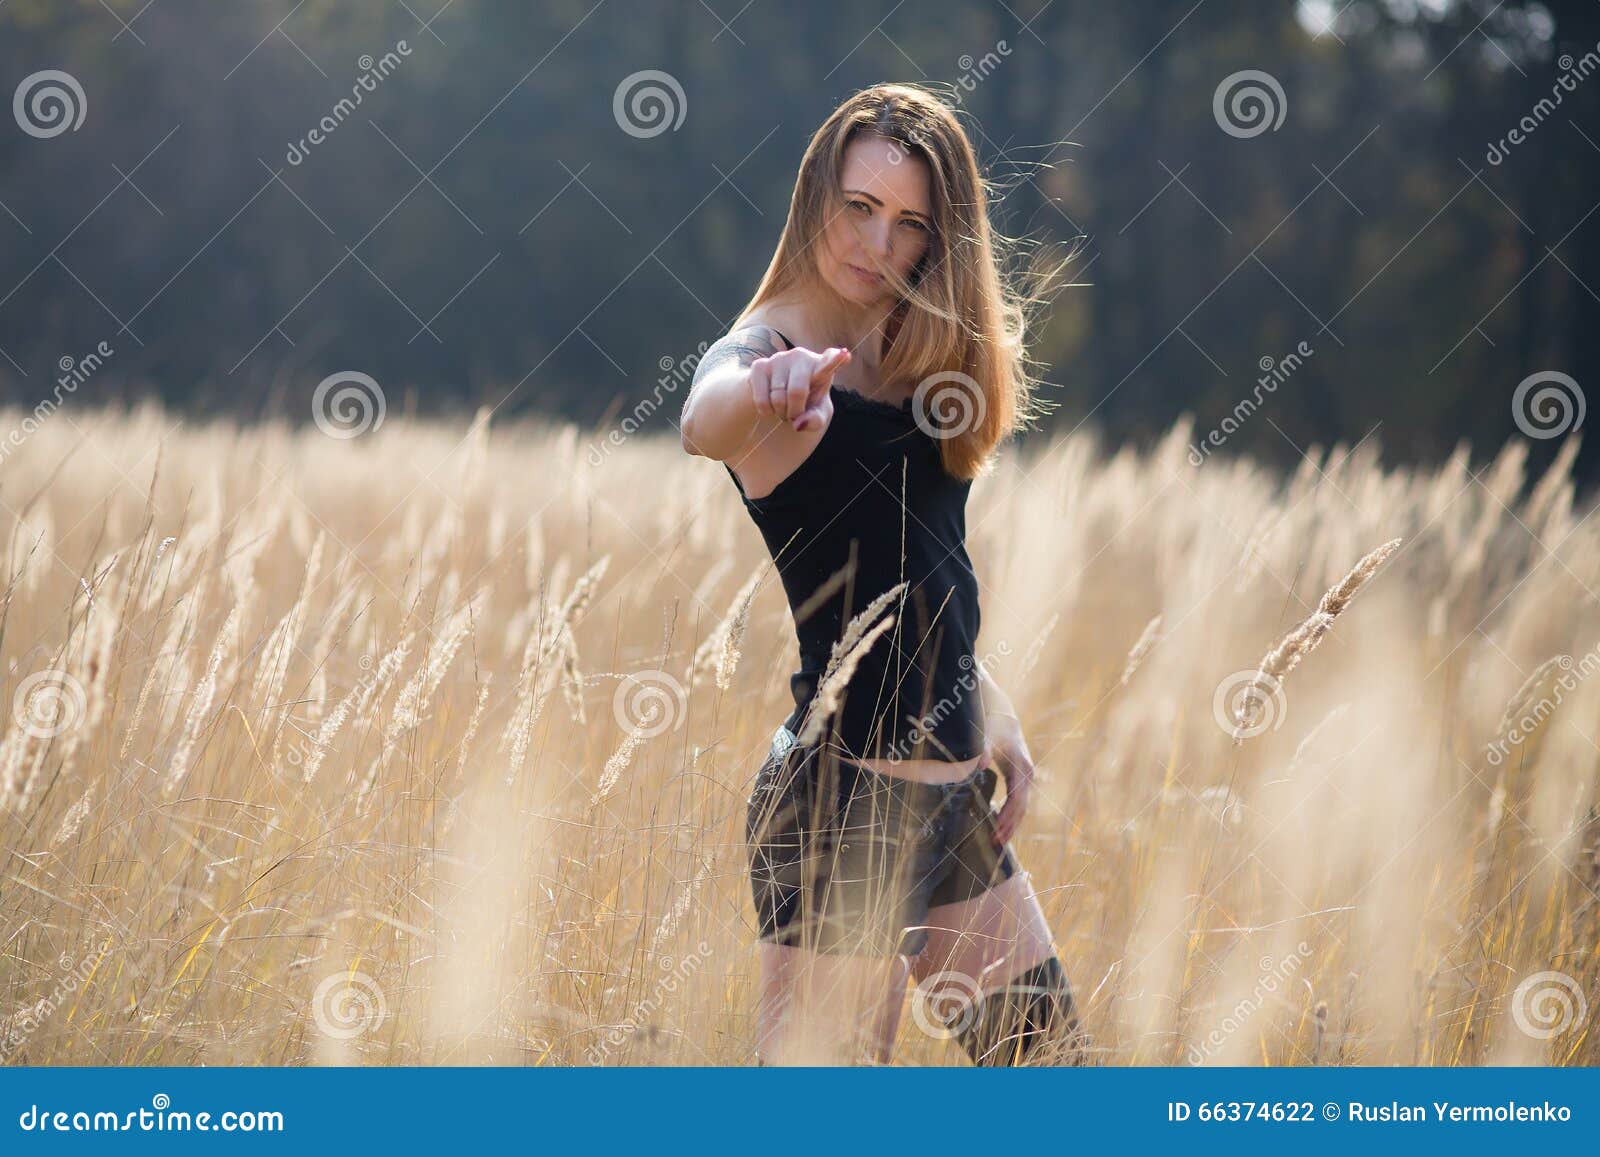 Woman Girl in Field Country Beauty Stock Photo - Image of natural ...